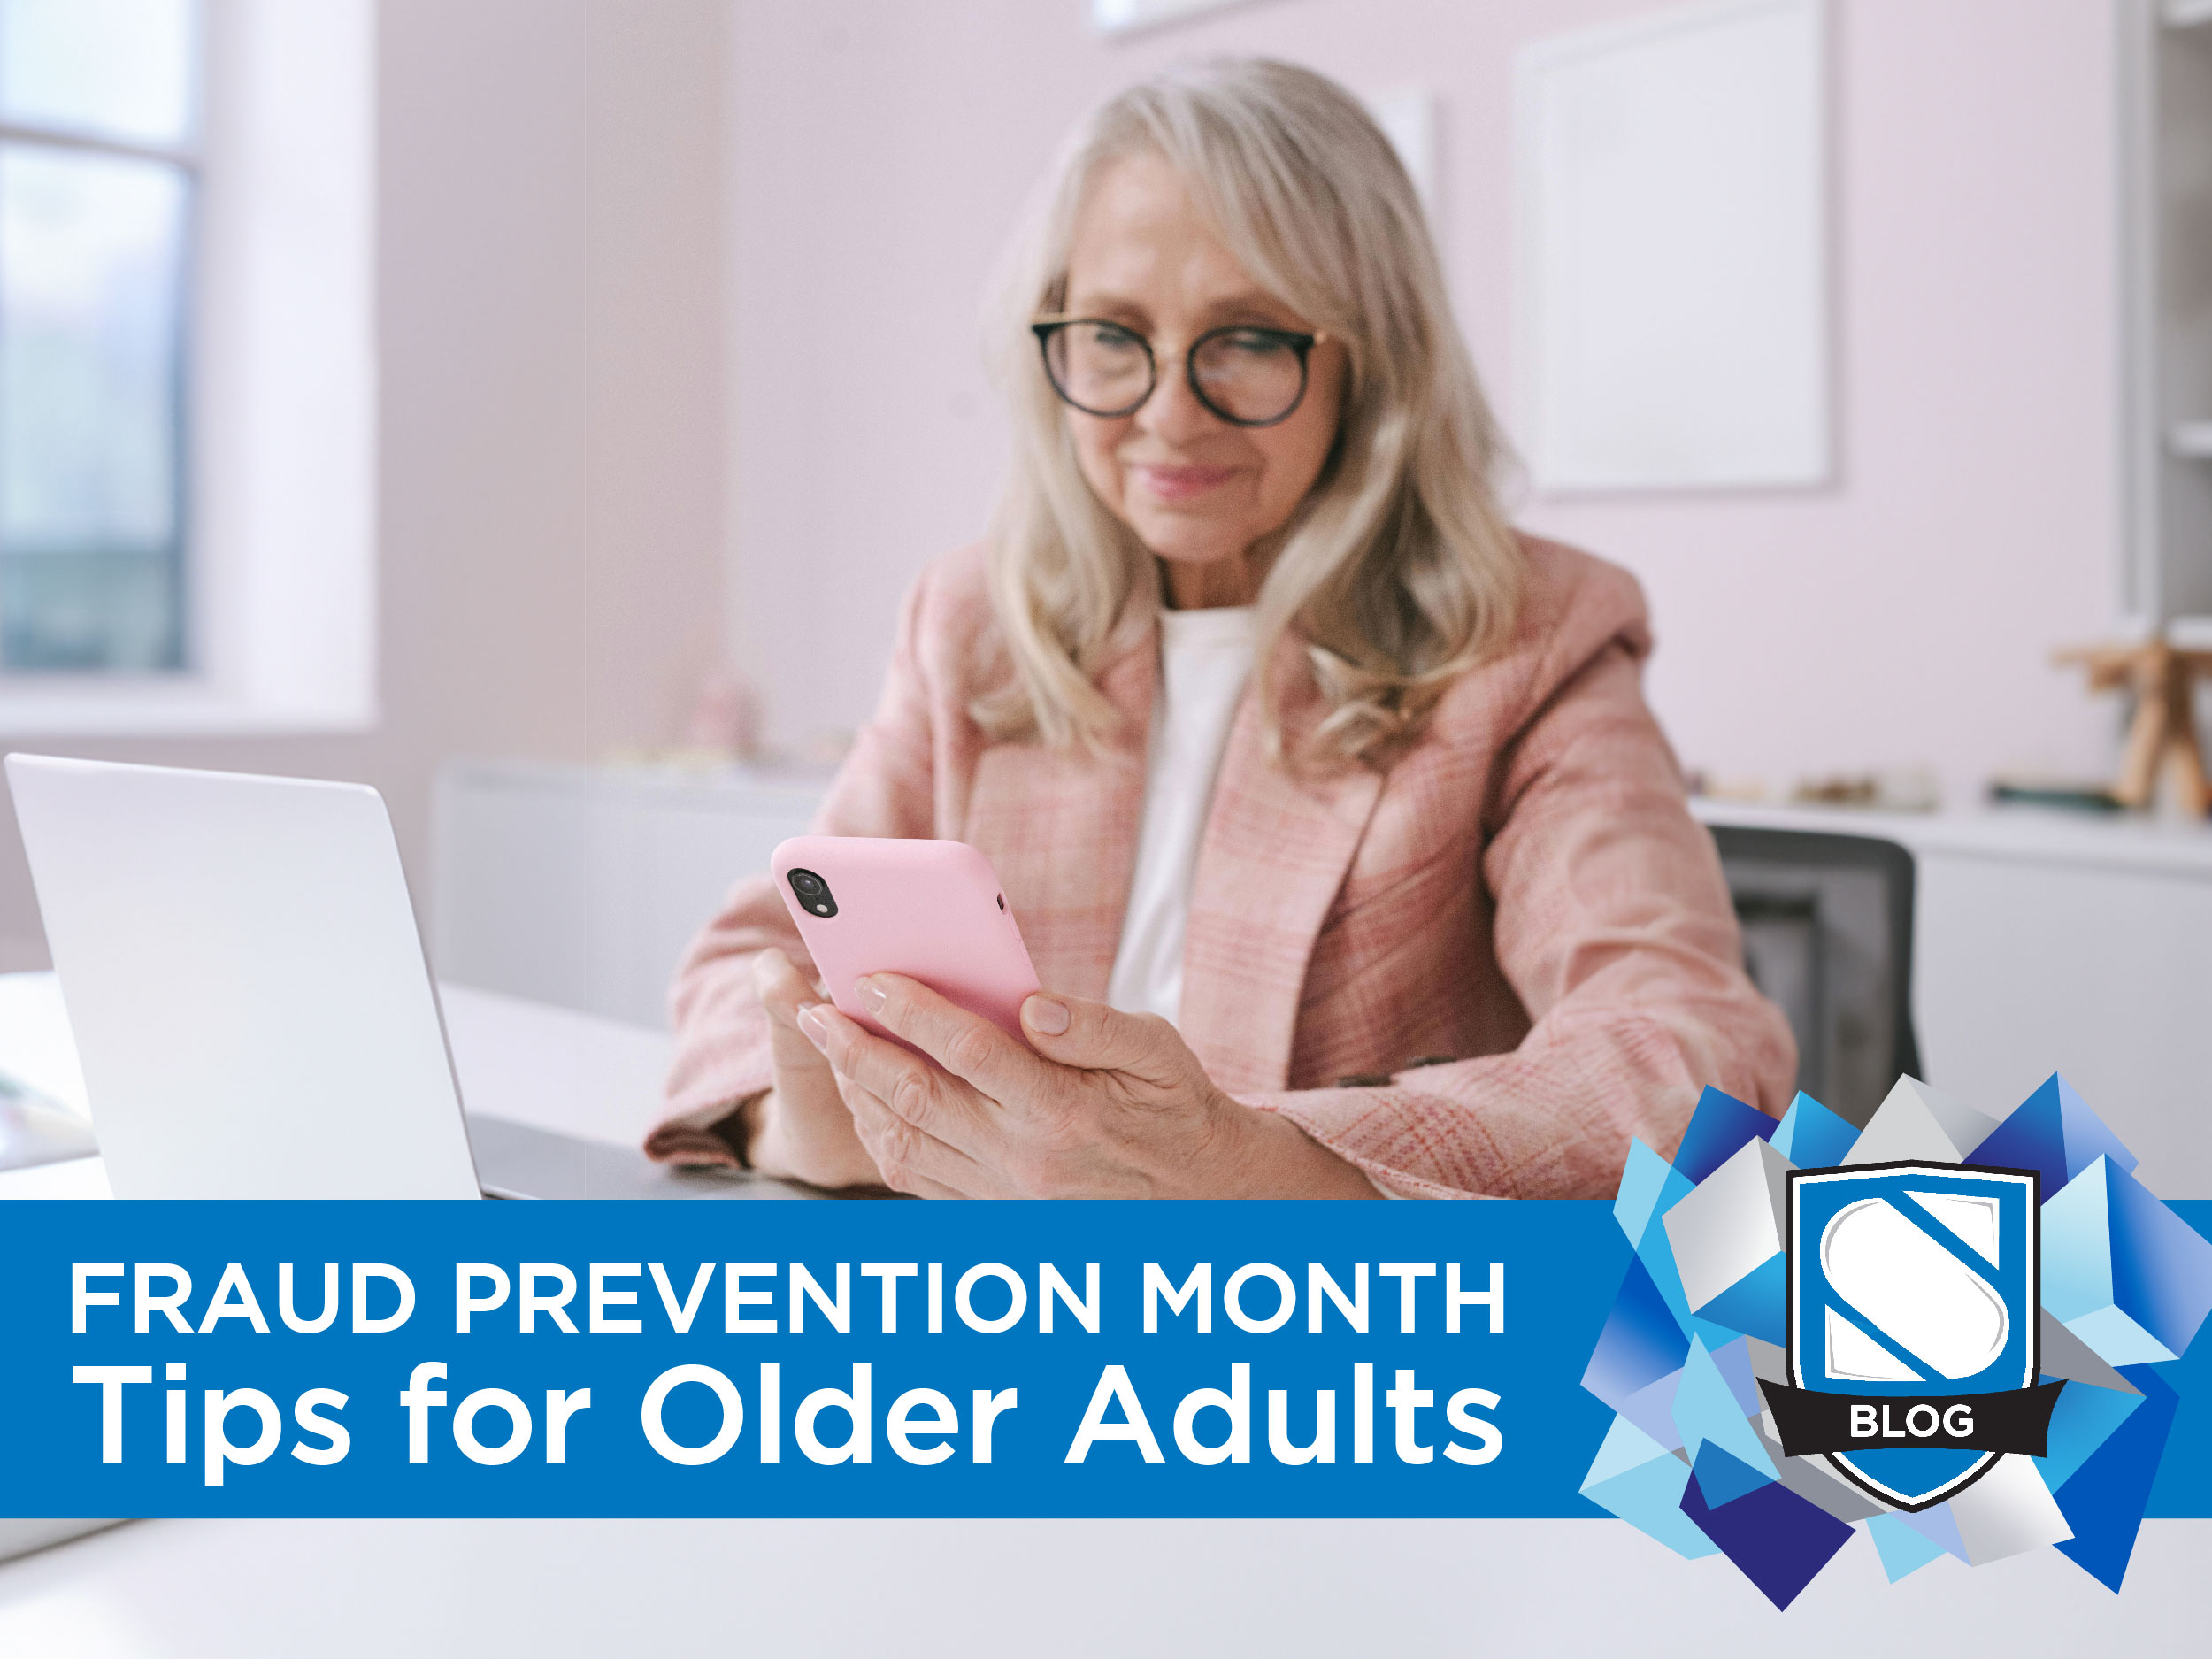 Fraud Prevention Month: 4 Tips to Share with Older Adults